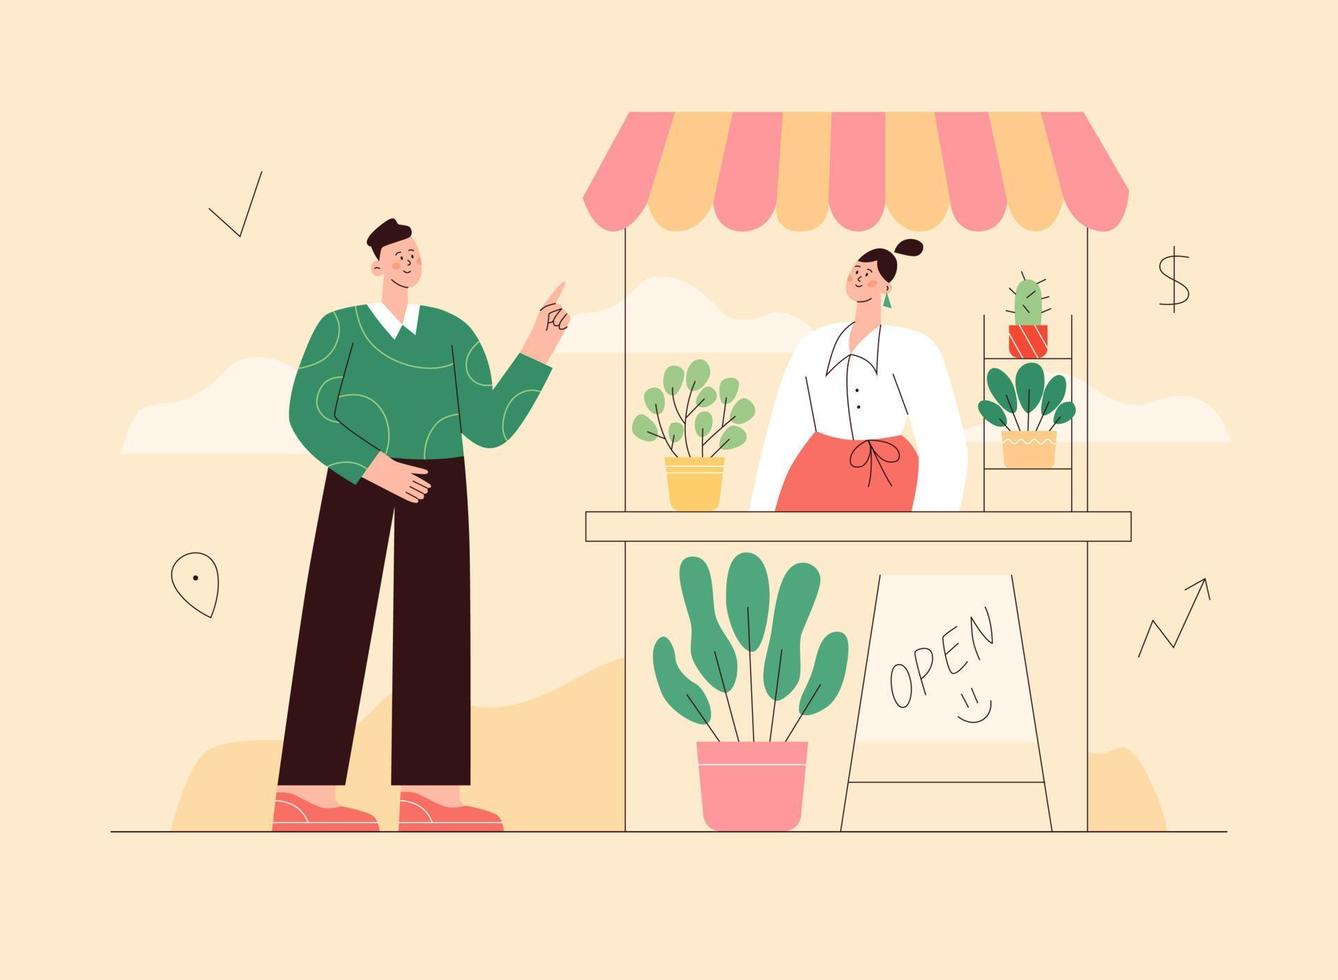 Outdoor market stalls, summer trade tents with seller. Local business shop. Customer buying something in outdoor kiosk. Flat vector illustration.